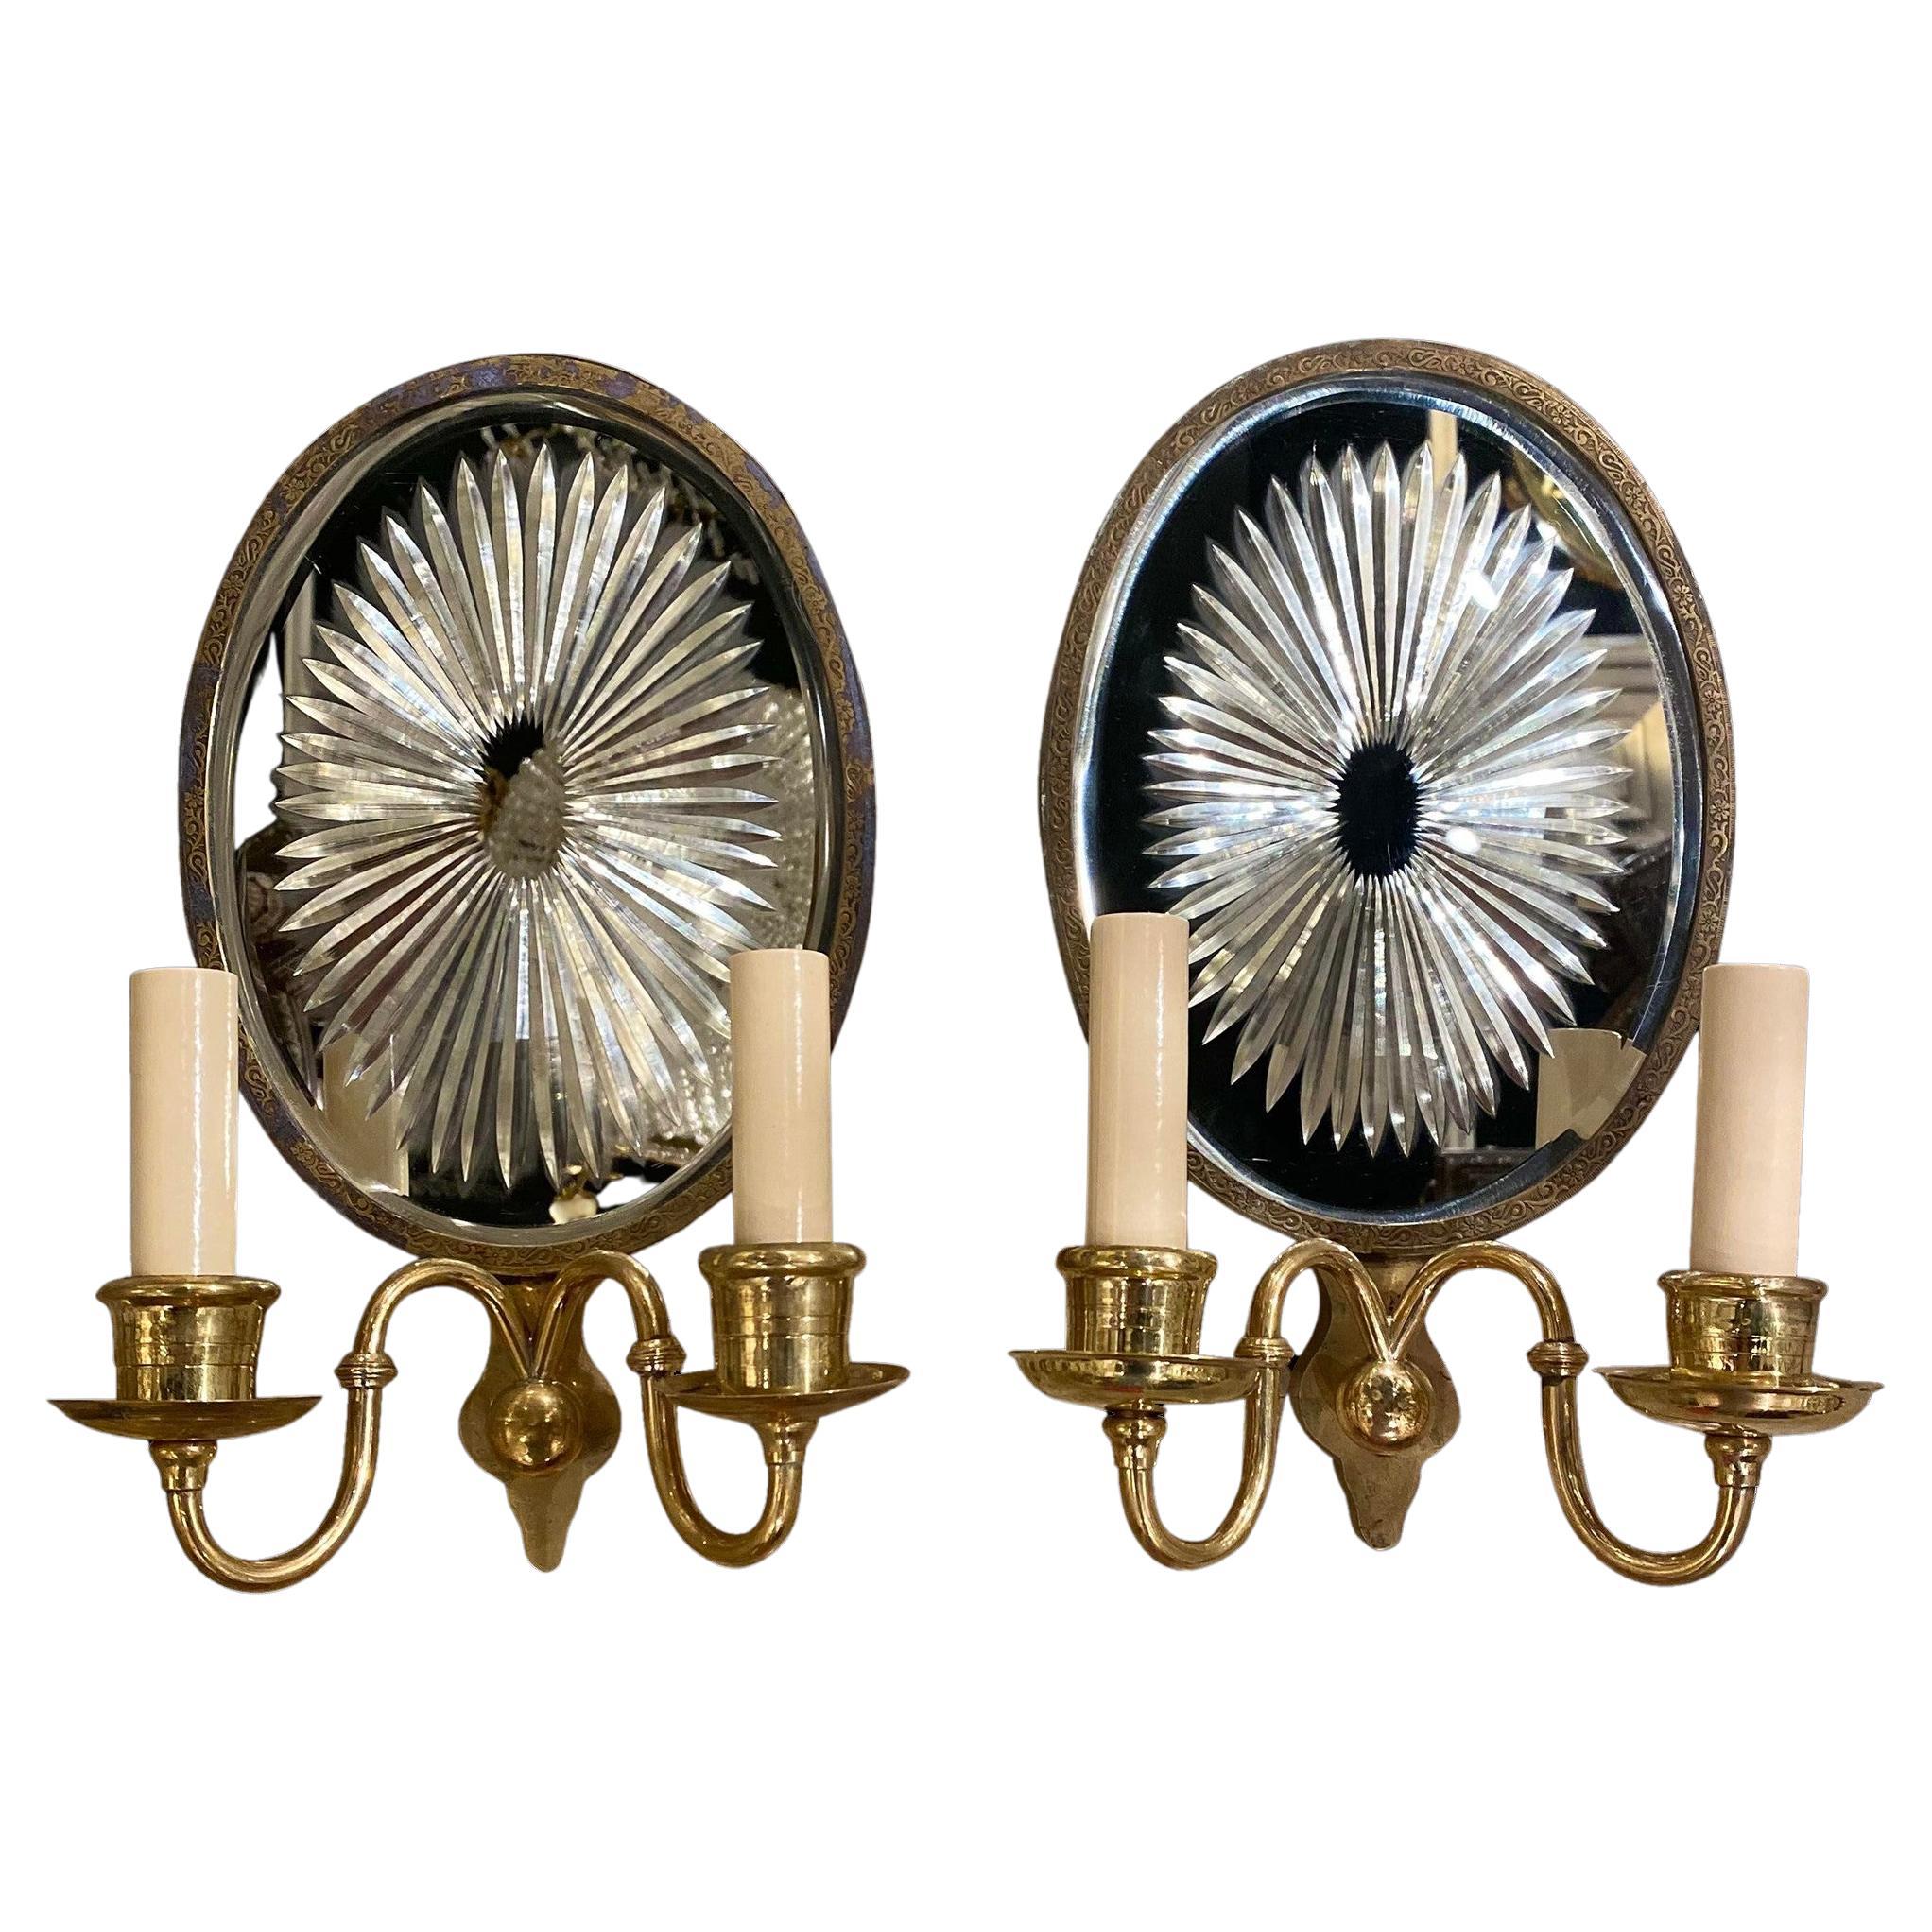 1920's Caldwell Double Lights Sconces with Mirror Backplate For Sale